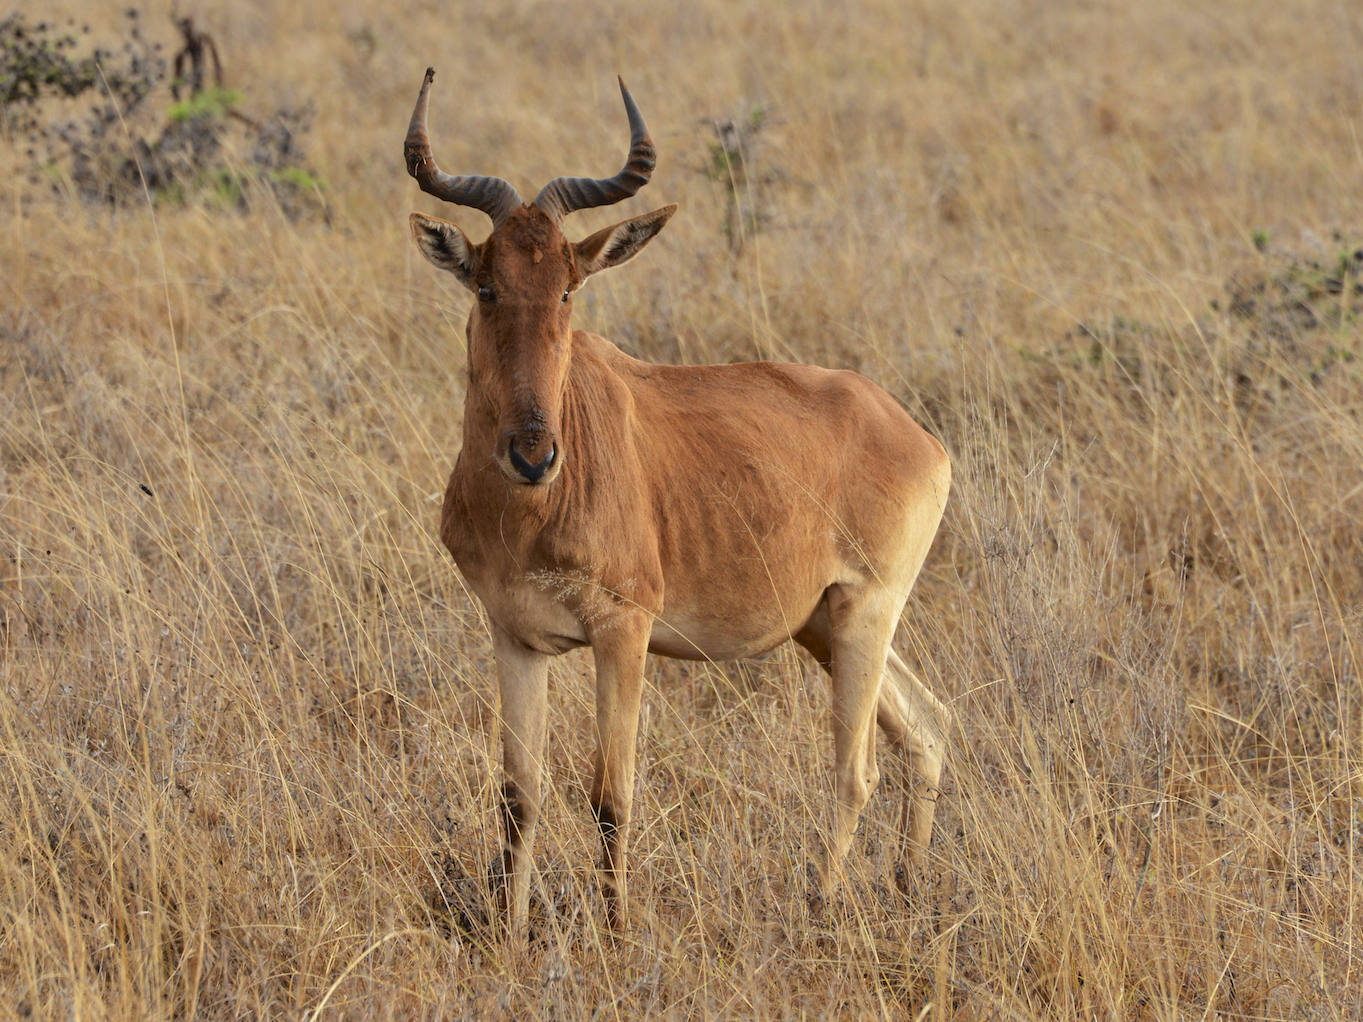 AFRICA: KENYA: A Hartebeest and stands defiant in the grassland of Nairobi National Park